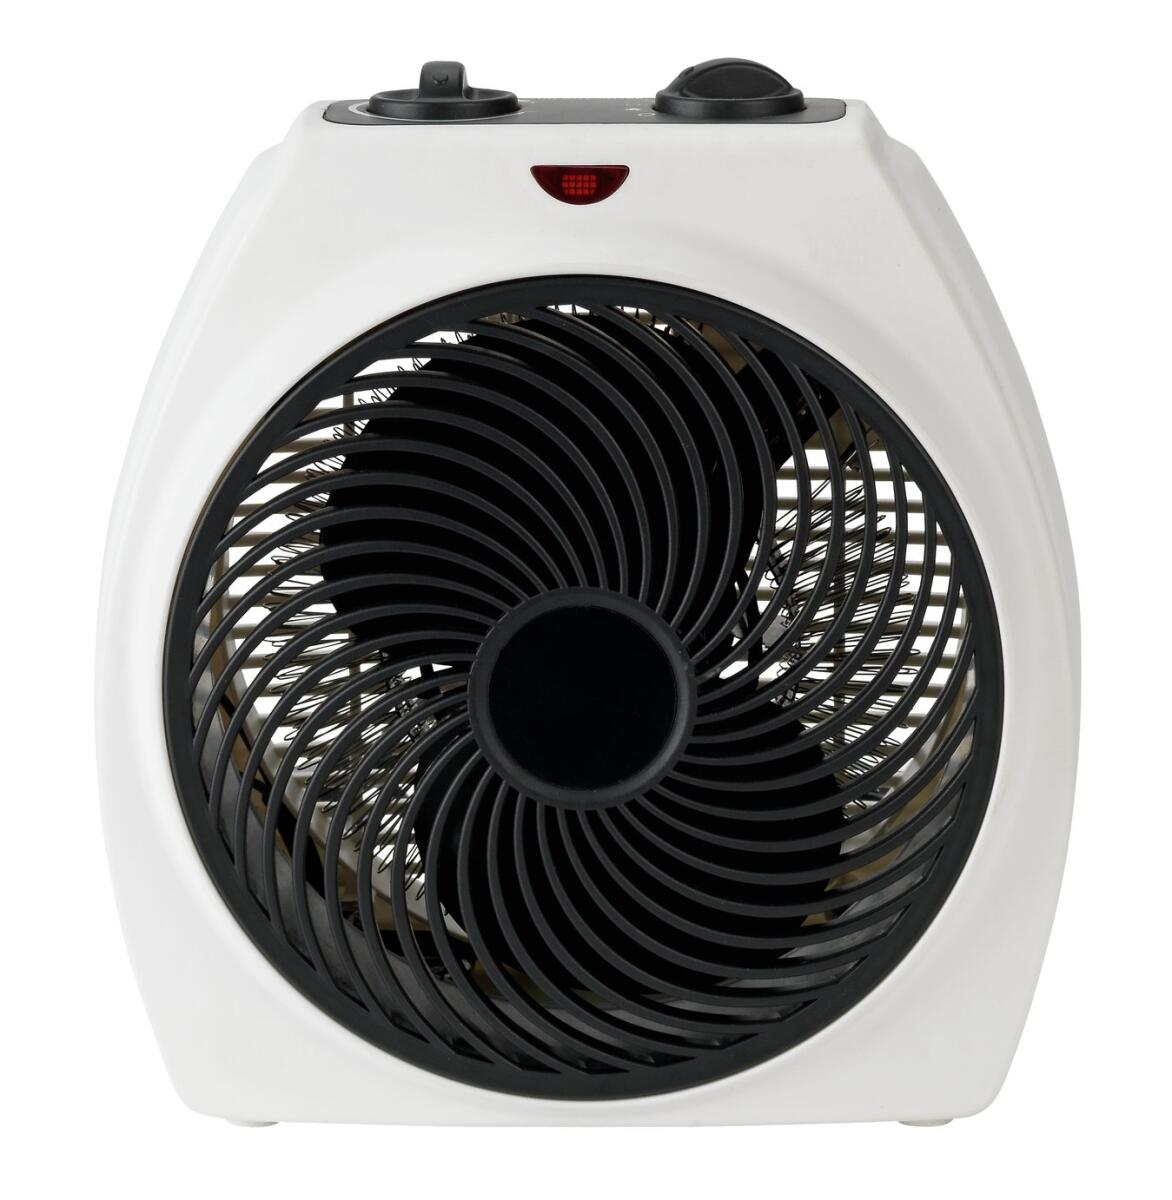 Simple Value 2kw Upright Fan Heater 499 Argos Hotukdeals with regard to sizing 1172 X 1200